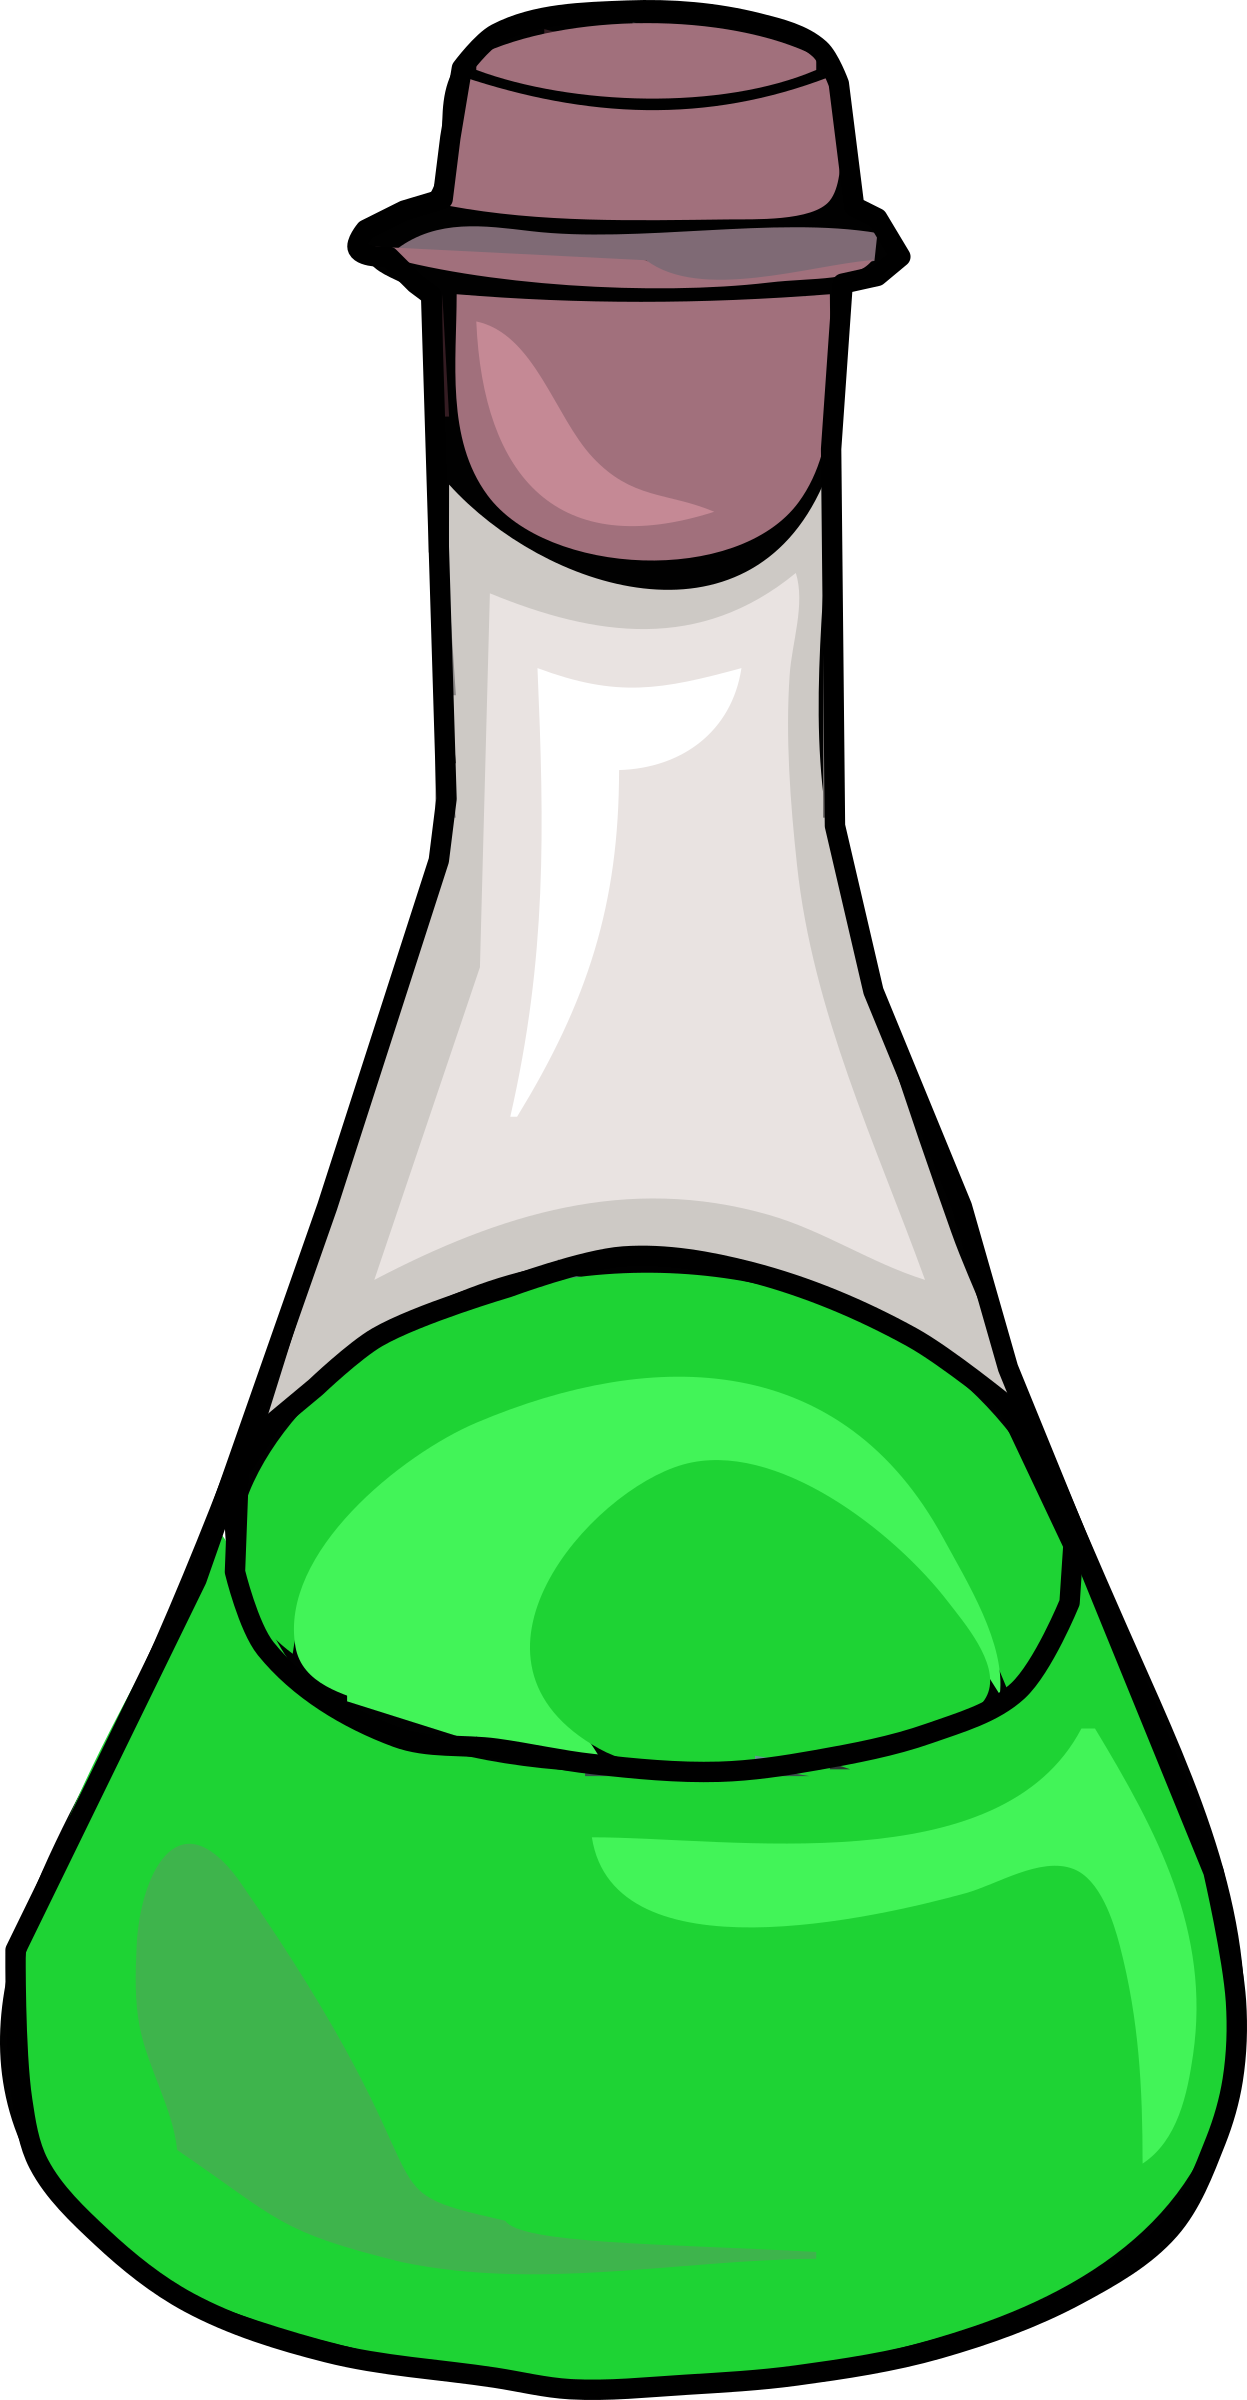 Science bottle big image. Slime clipart neon green